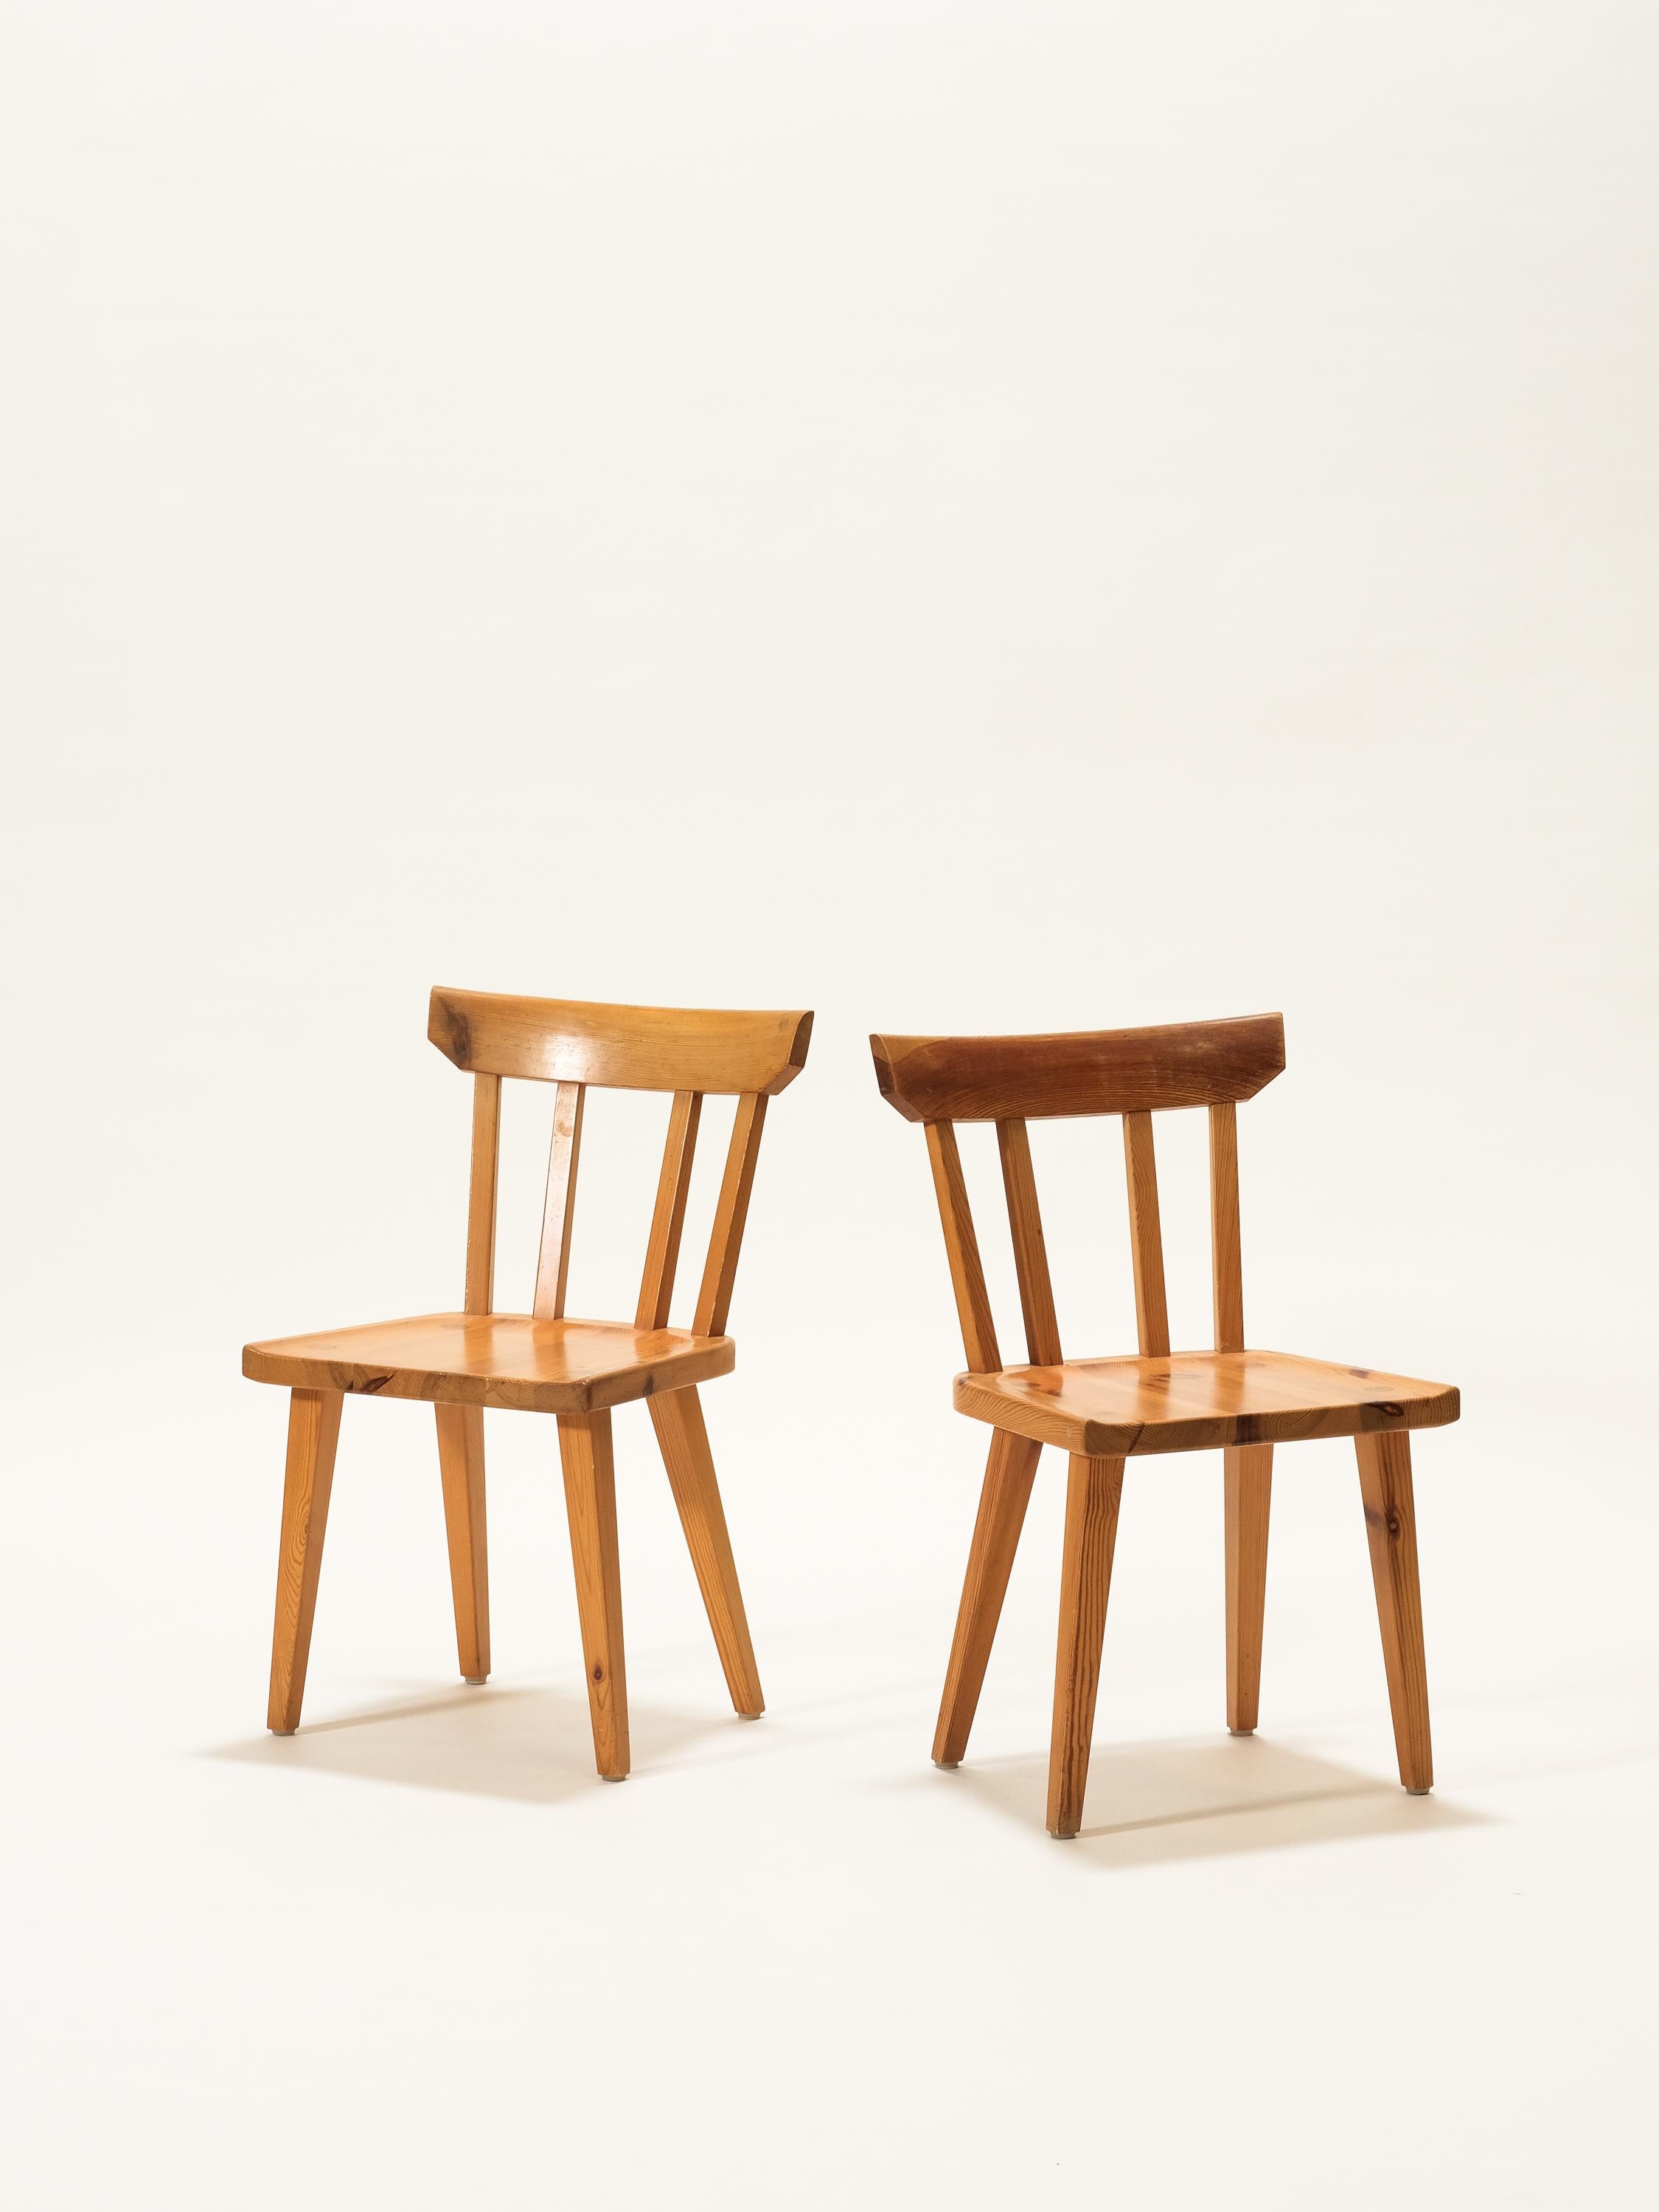 Set of two '528' Swedish pine dining chairs by Göran Malmwall manufactured by Karl Andersson & Söner, Husqvarna, Sweden.